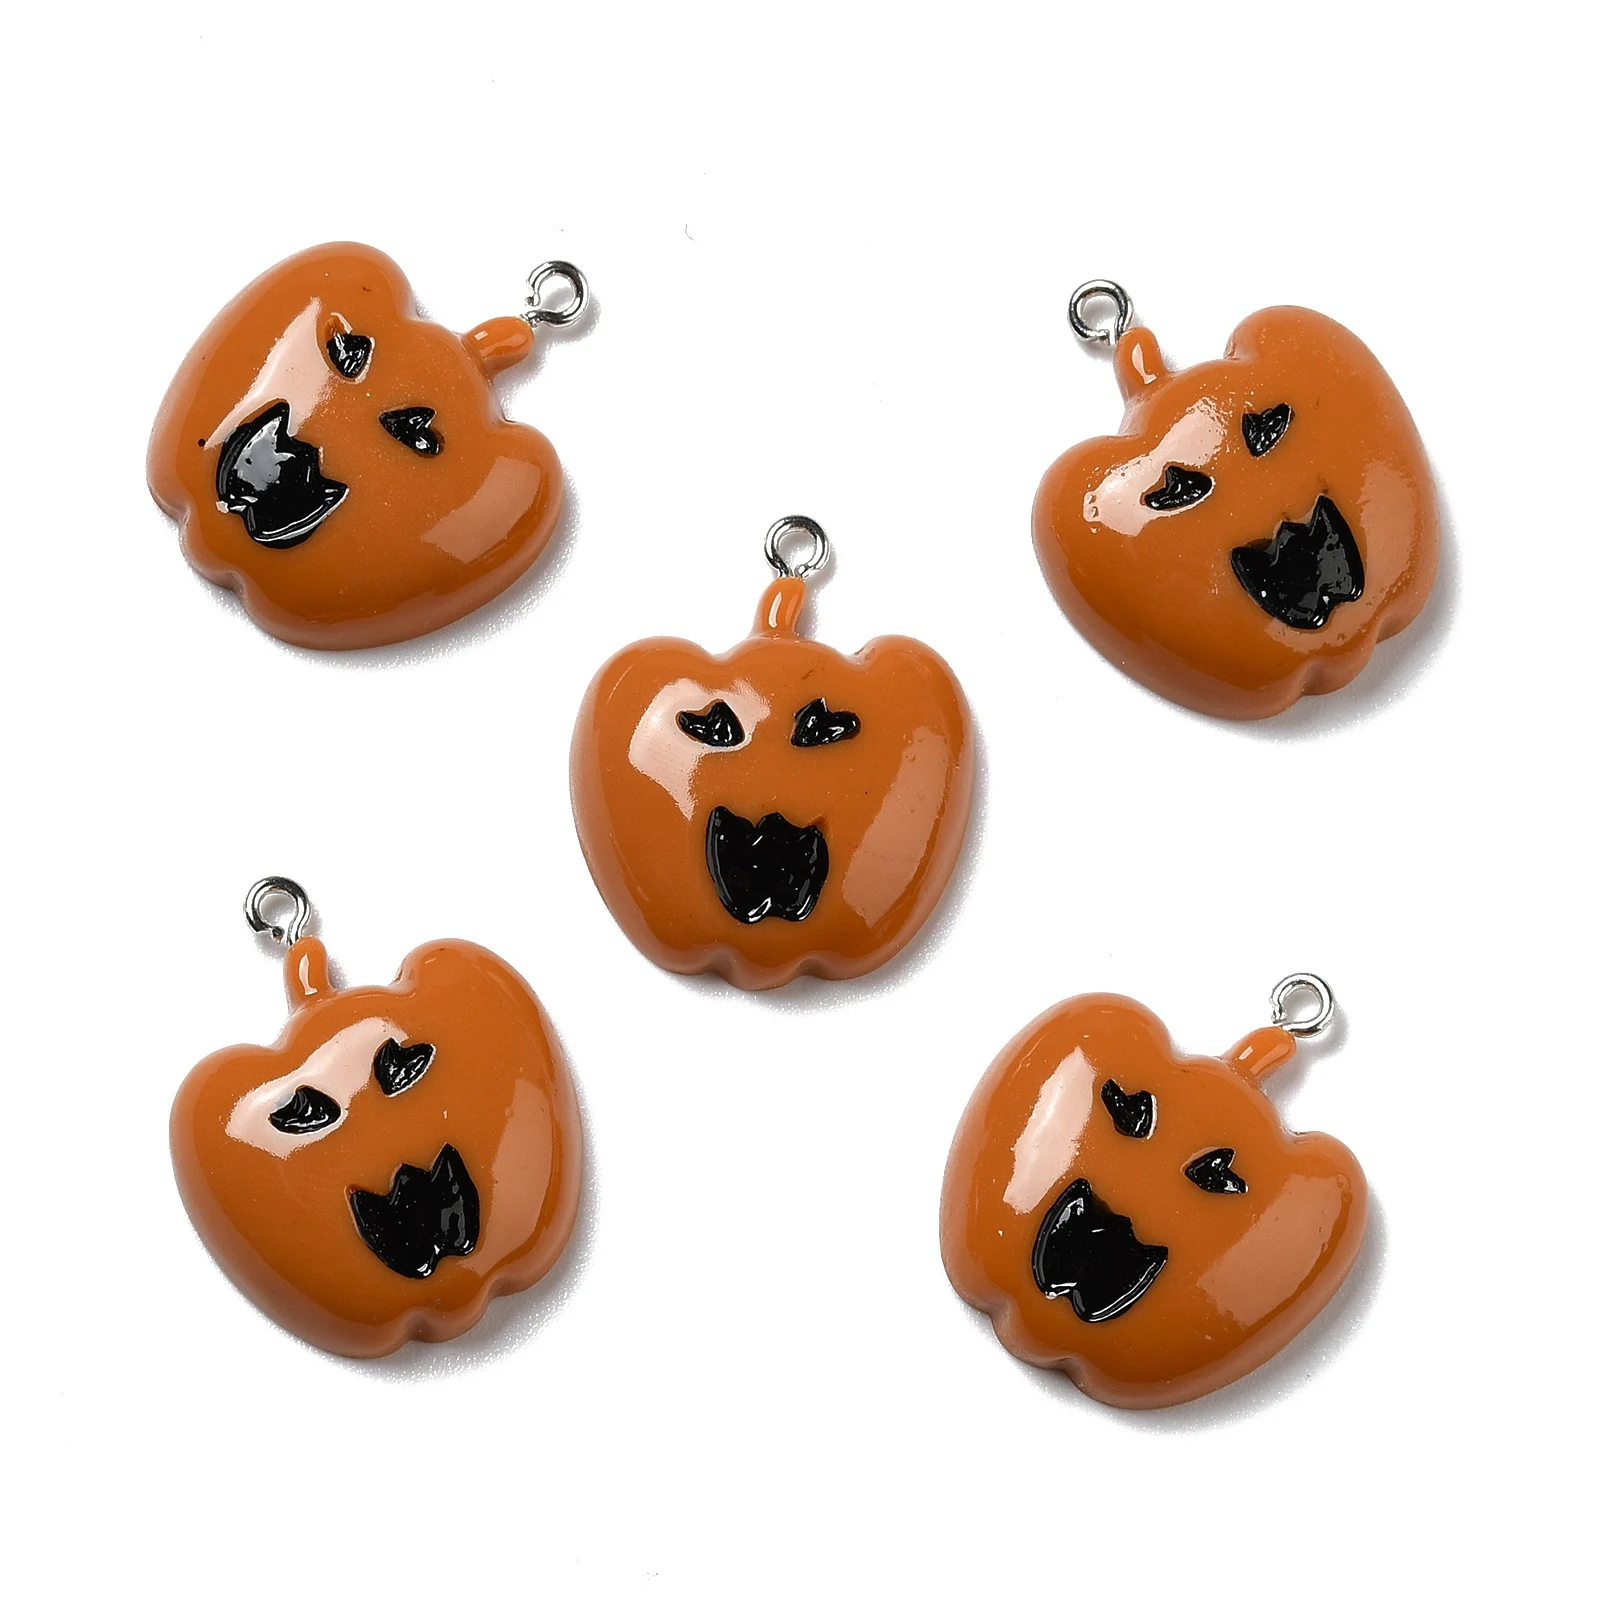 30pcs Halloween Opaque Resin Pendants Ghost Pumpkin Black Cat Evil Charms for Party Decor Earring Necklace Jewelry DIY Making